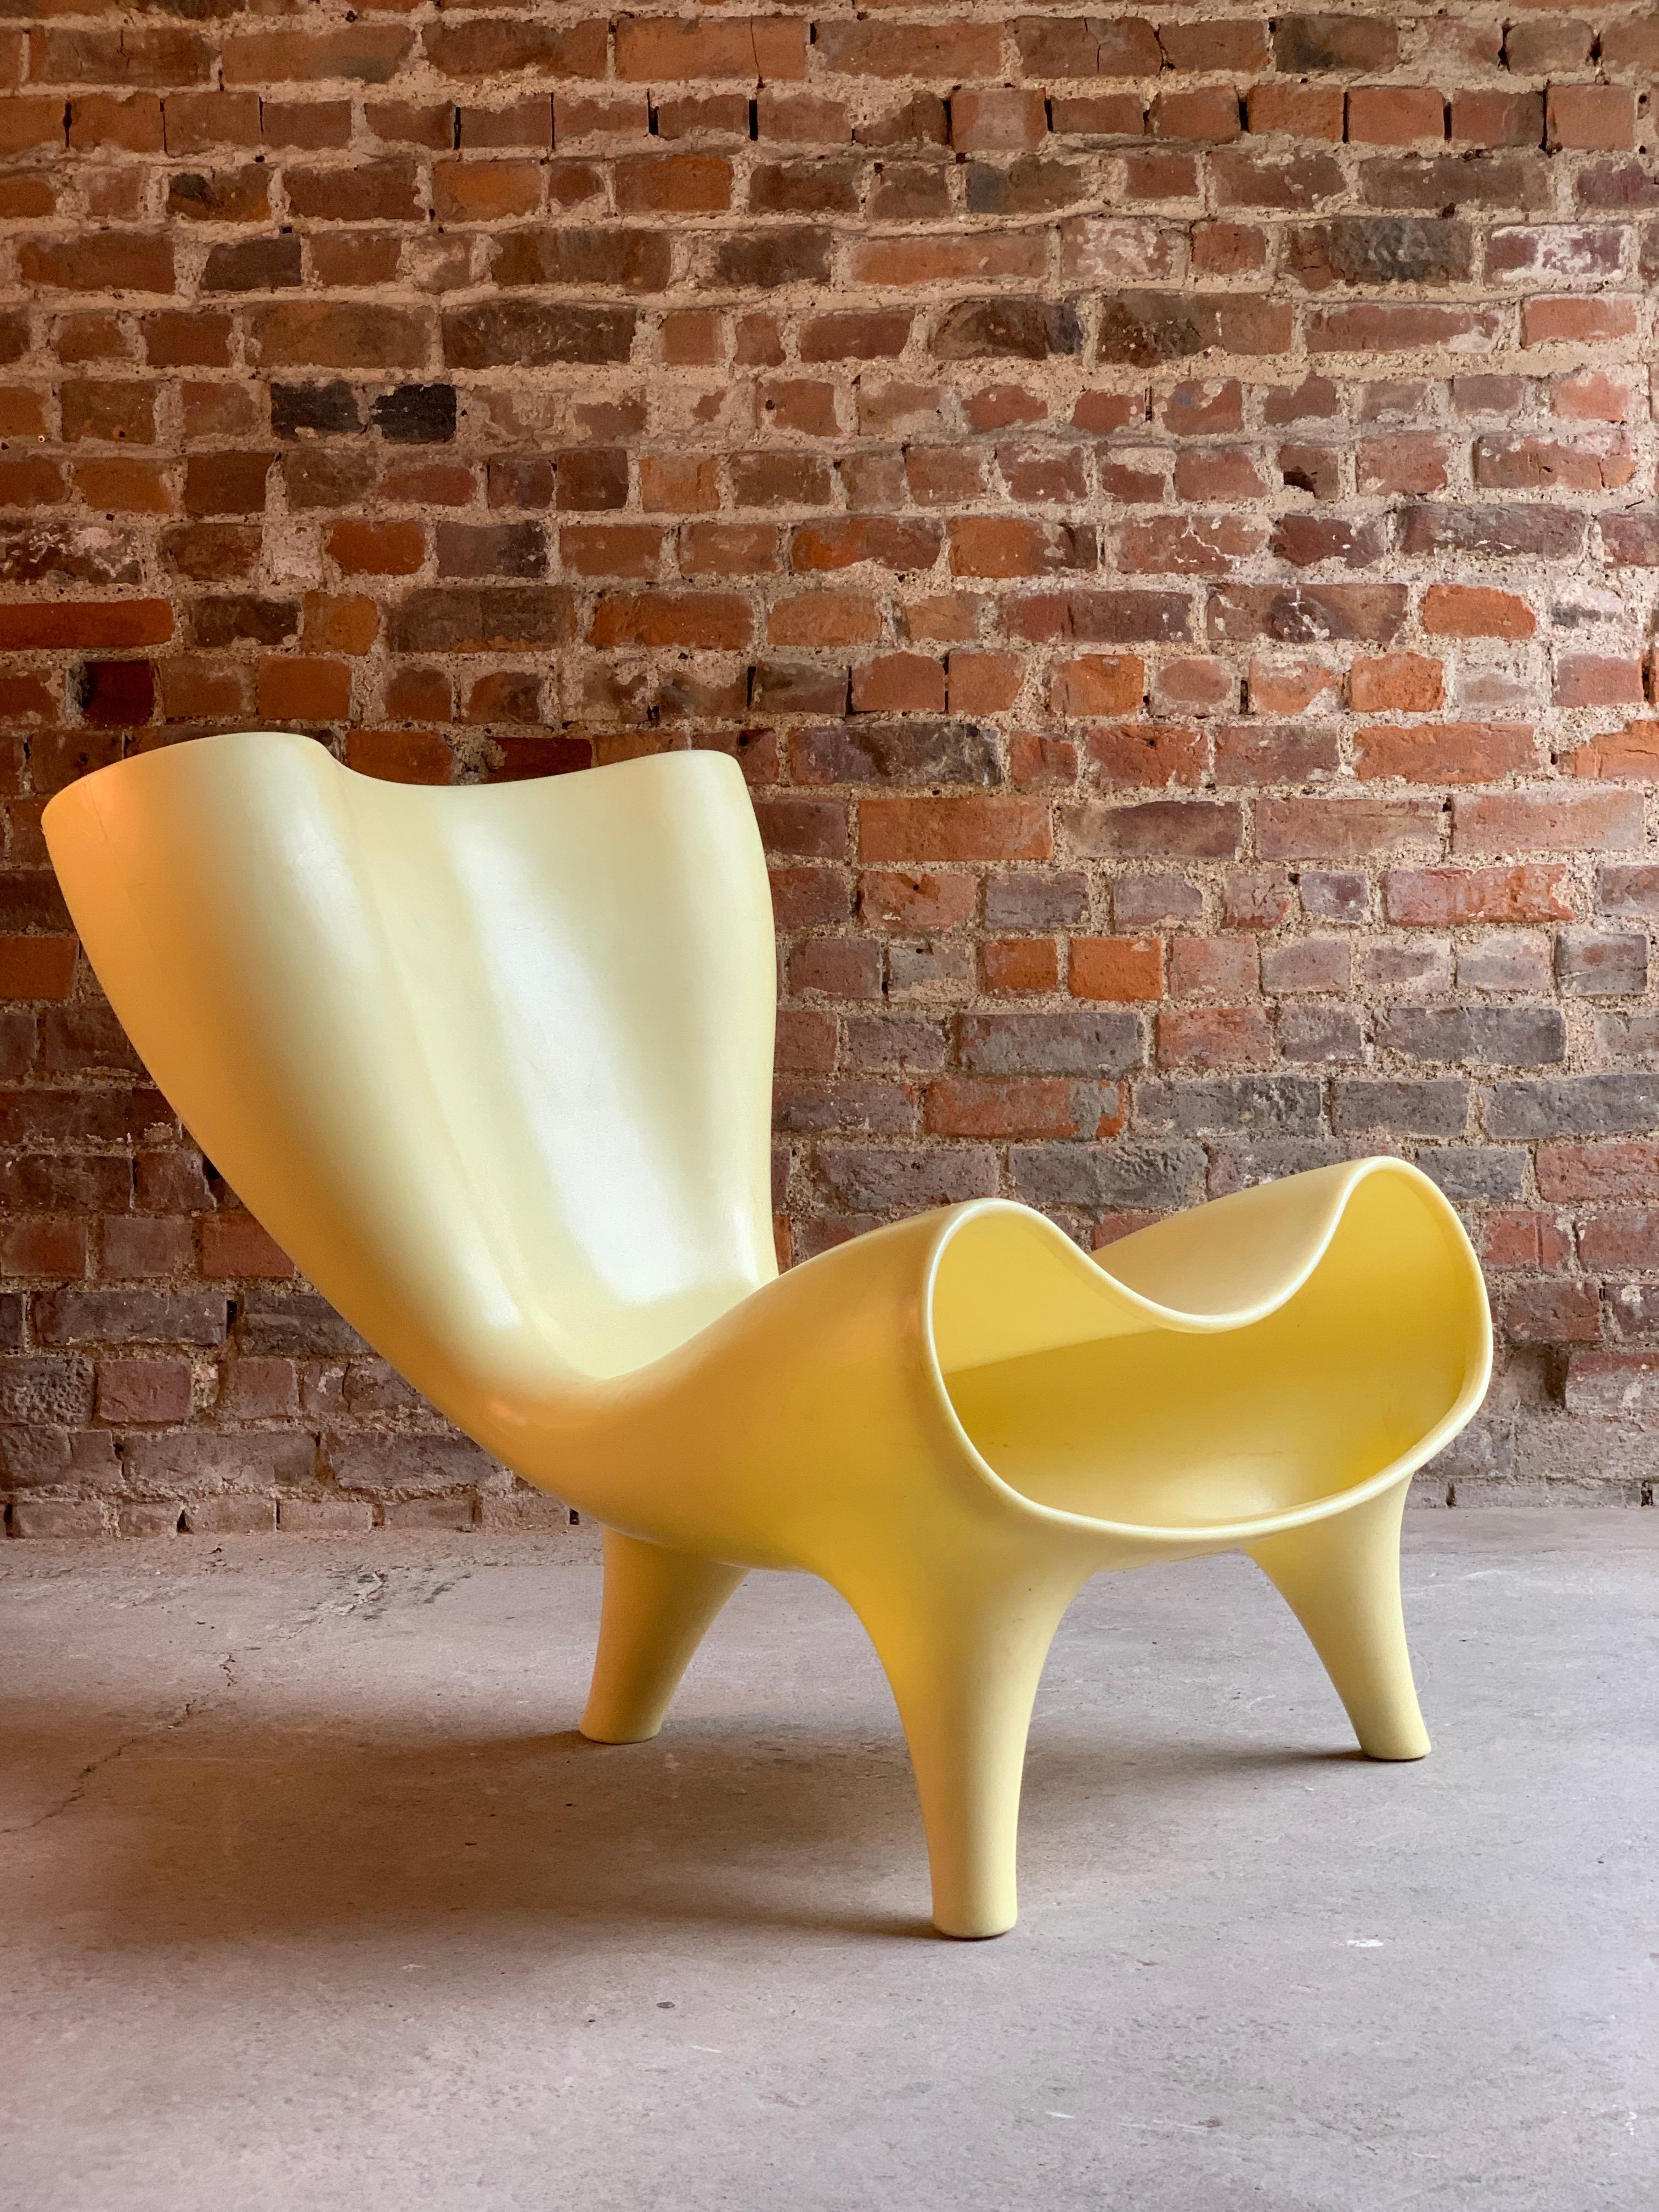 Marc Newson Orgone chair, circa 1993

Rare Orgone chair by Marc Newson circa 1993 finished in ivory, the Orgone chair was designed in 1993 by Marc Newson. The original design comes from a series of limited edition aluminum furniture designed by